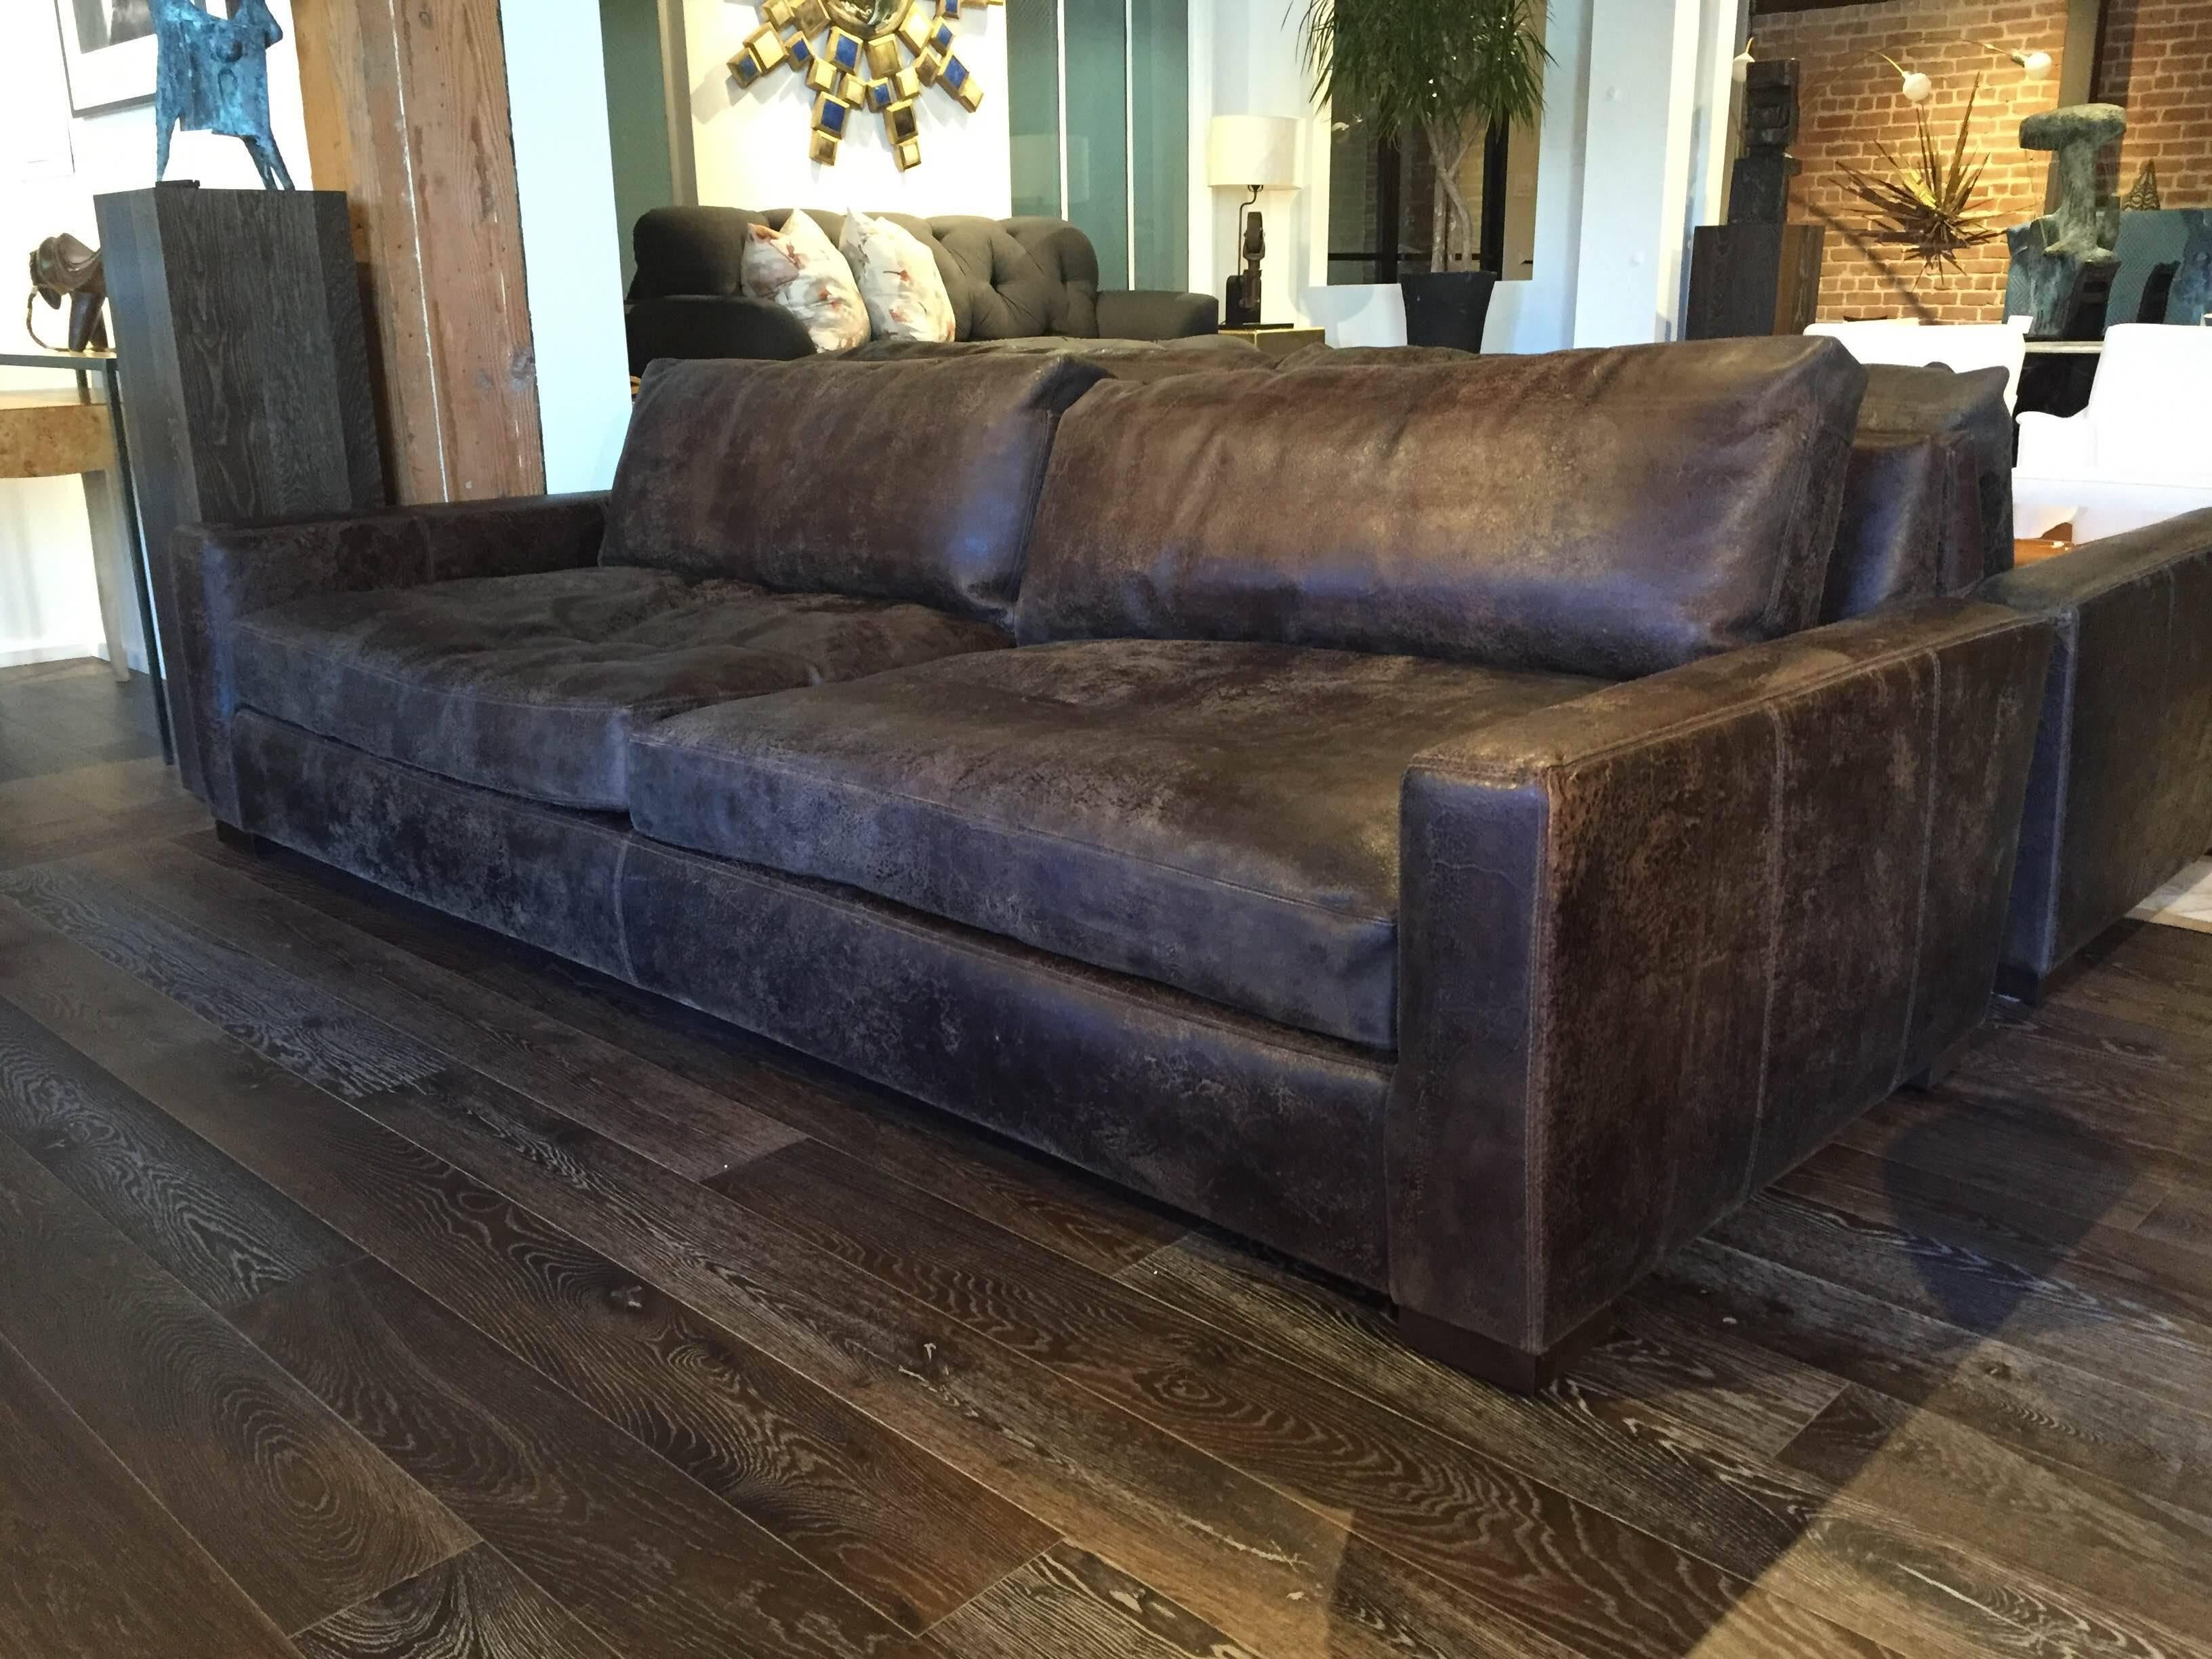 Streamlined sofa with a low back. Seat and back cushions are wide and squared-off. Upholstered in dark distressed leather.